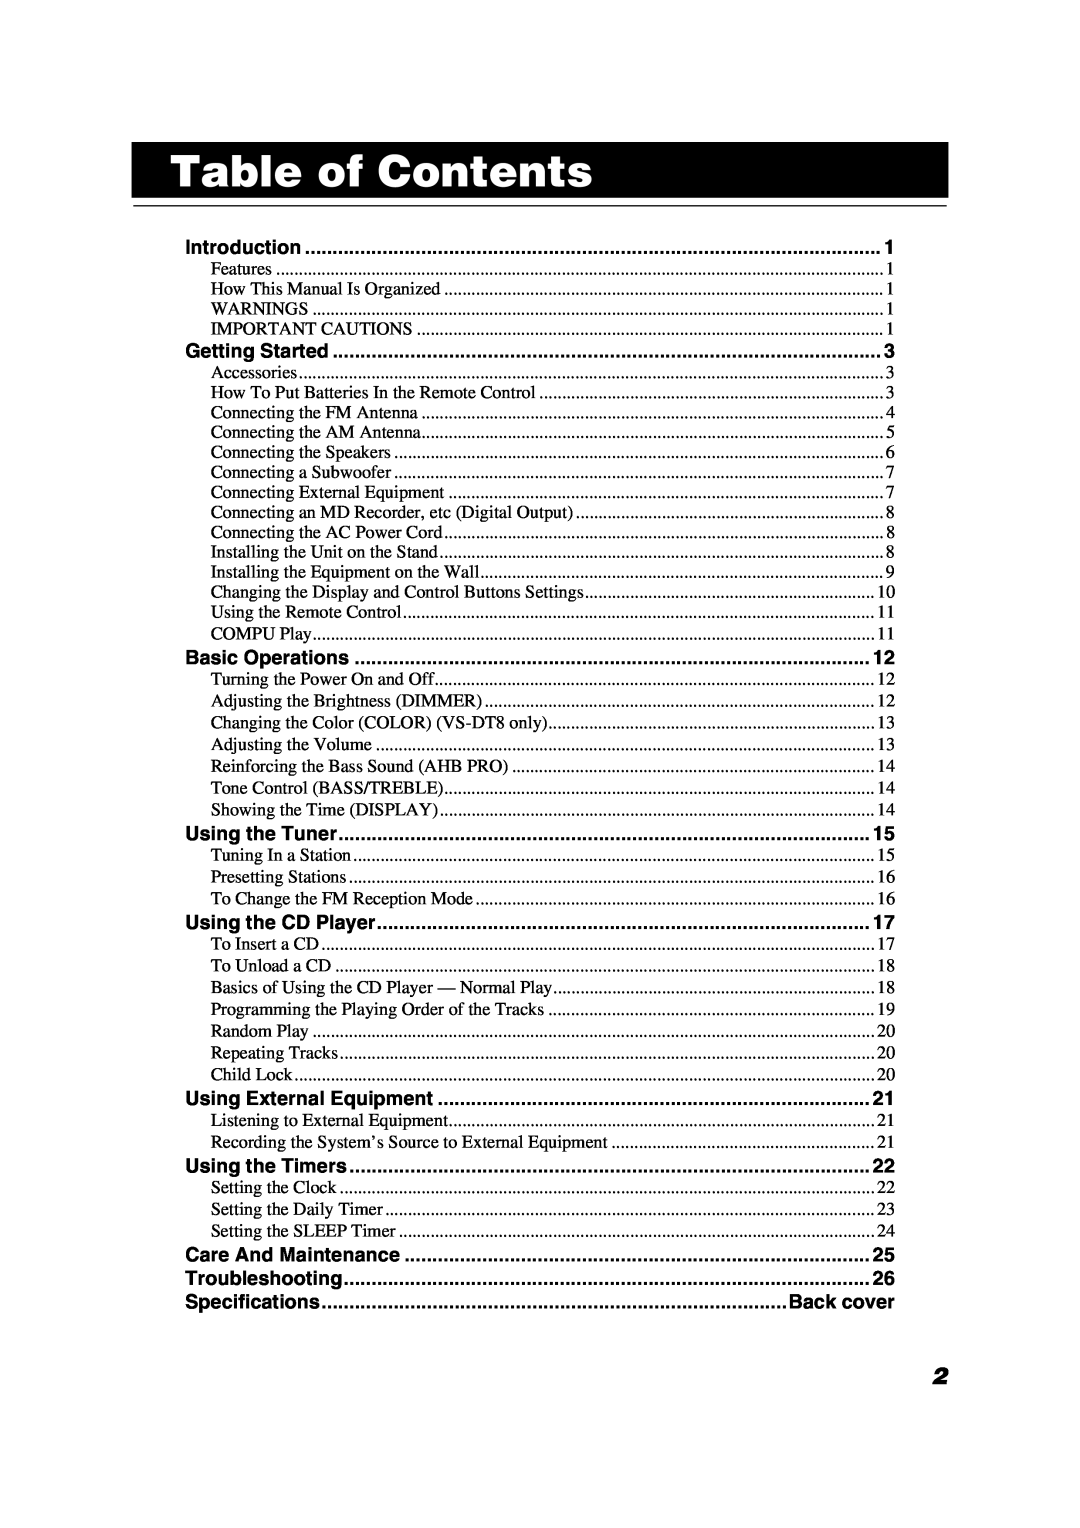 JVC VS-DT6/VS-DT8 manual Table of Contents, Specifications 